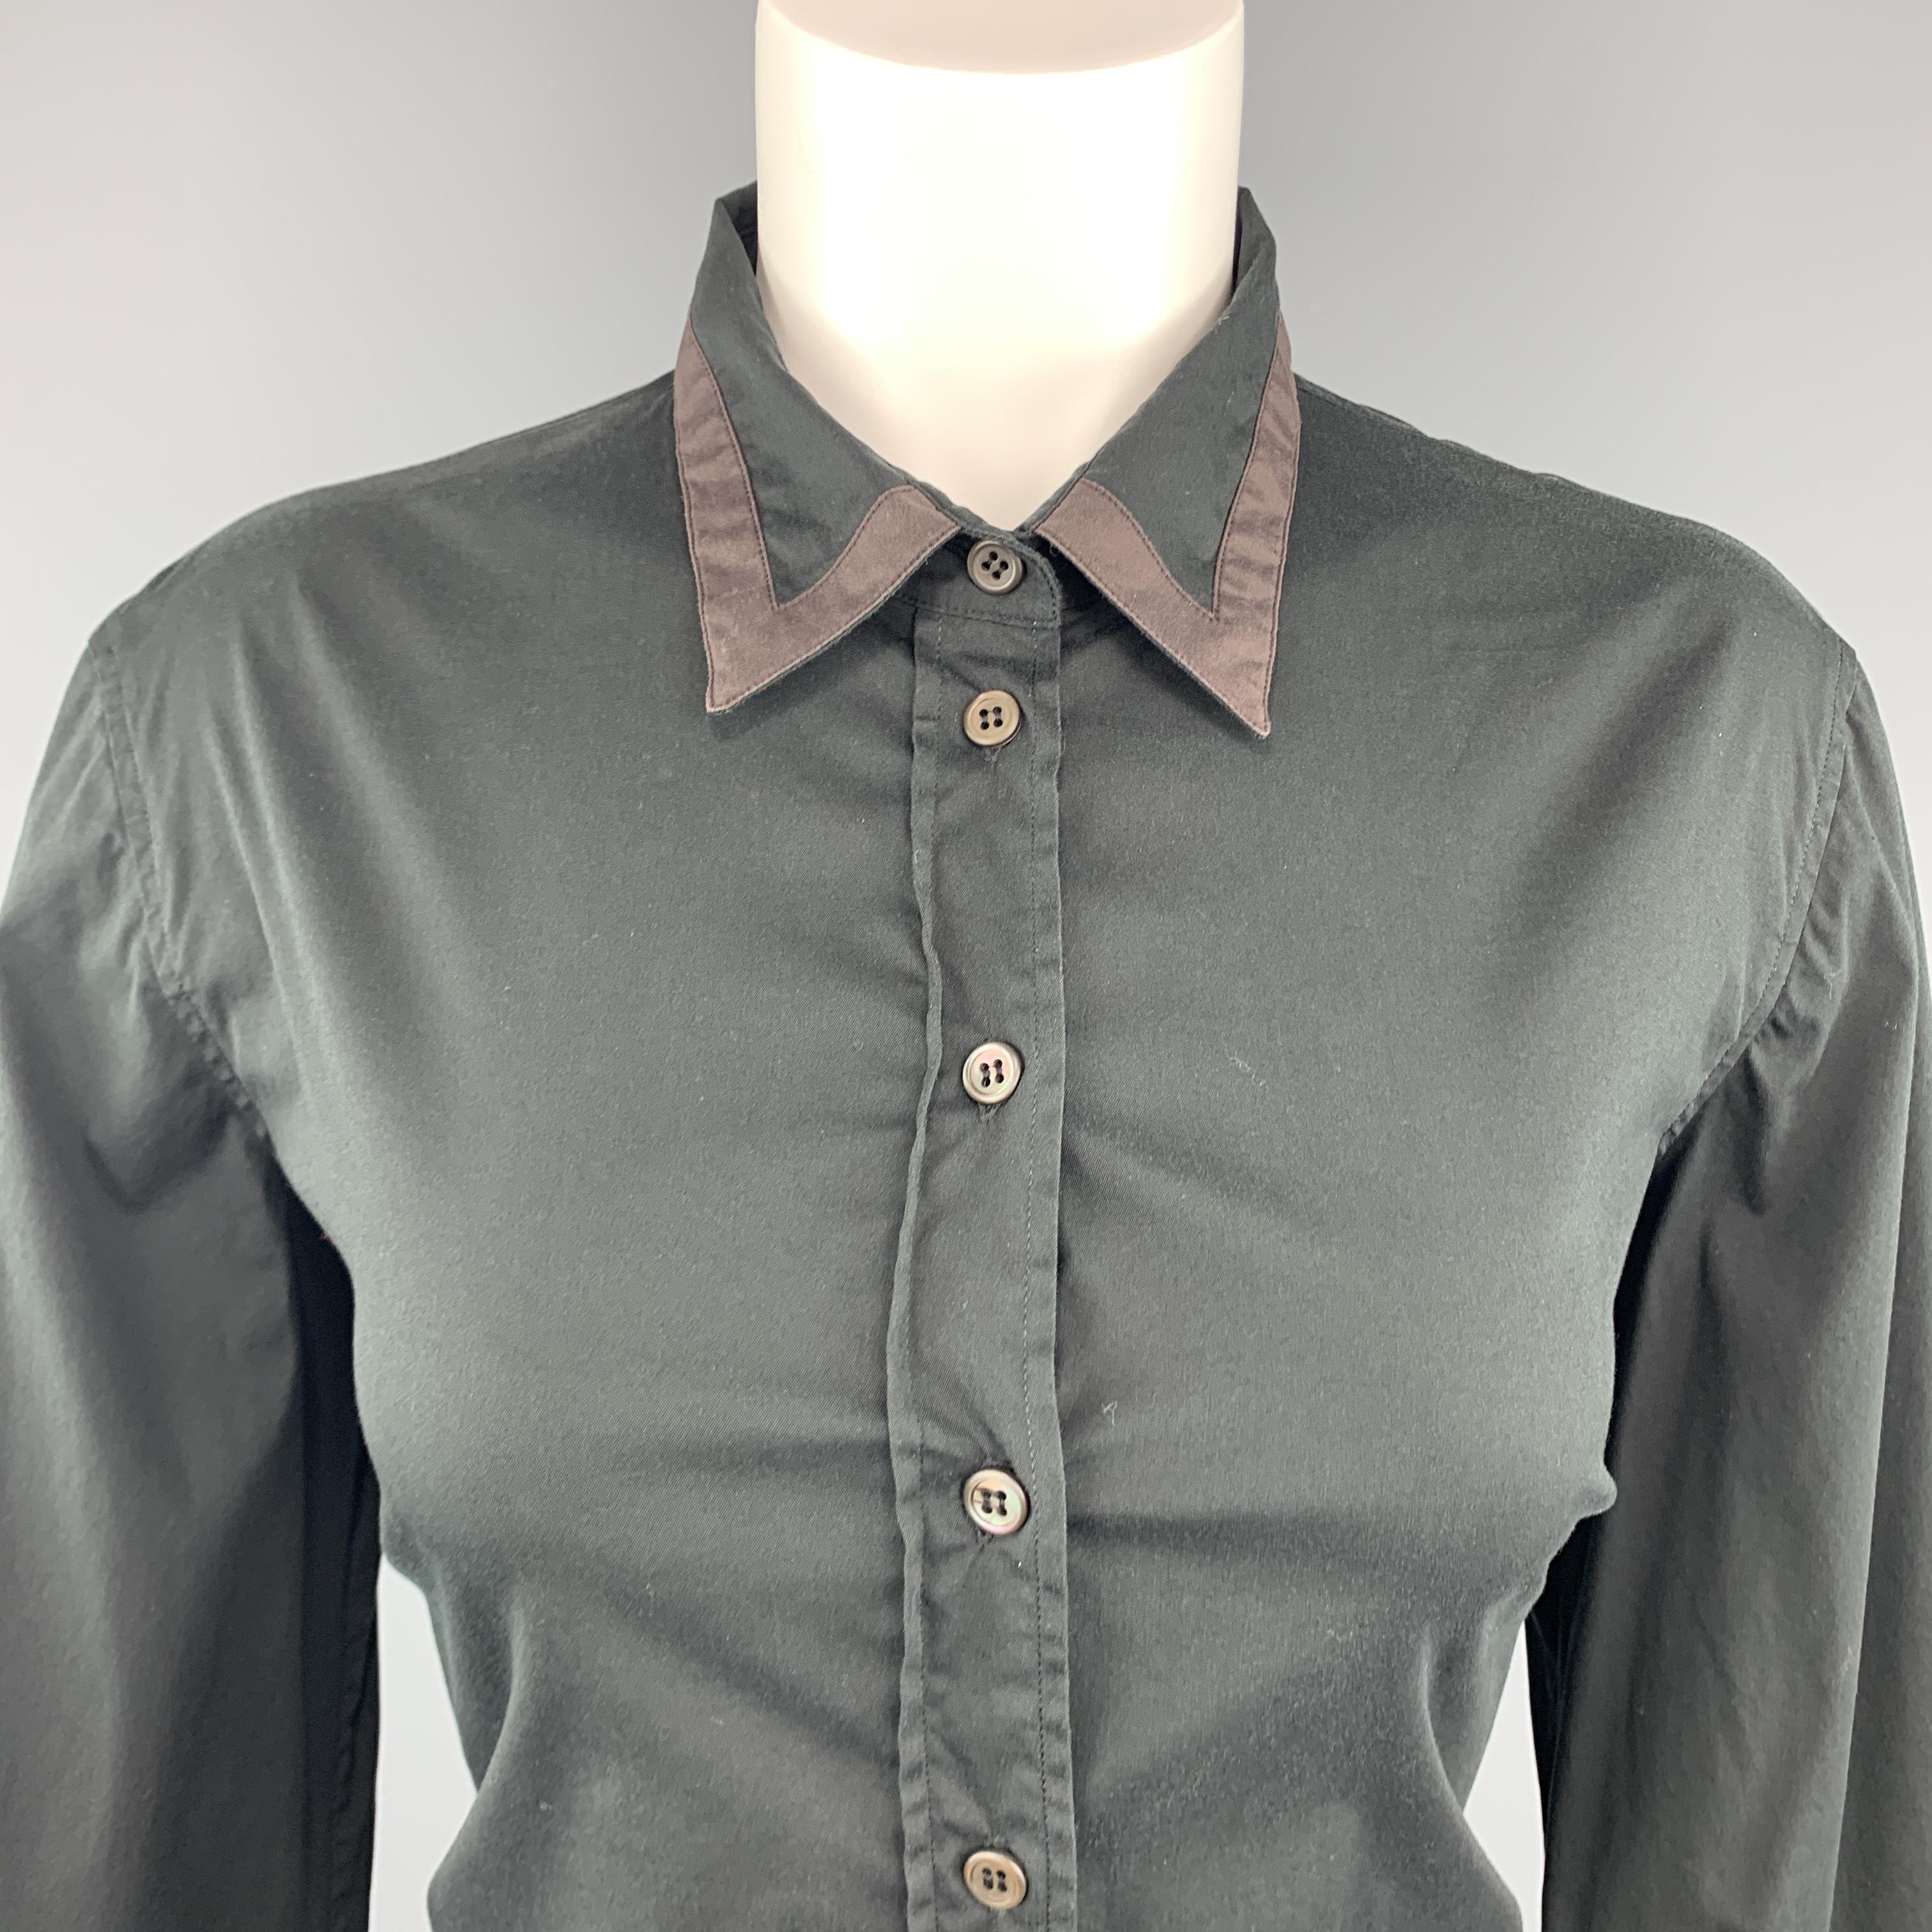 PRADA shirt comes in black stretch cotton with a cropped sleeves and brown trim along collar and cuffs. Made in Italy.
 
Very Good Pre-Owned Condition.
Marked: IT 46
 
Measurements:
 
Shoulder: 17 in.
Bust: 38 in.
Sleeve: 18 in.
Length: 23 in.